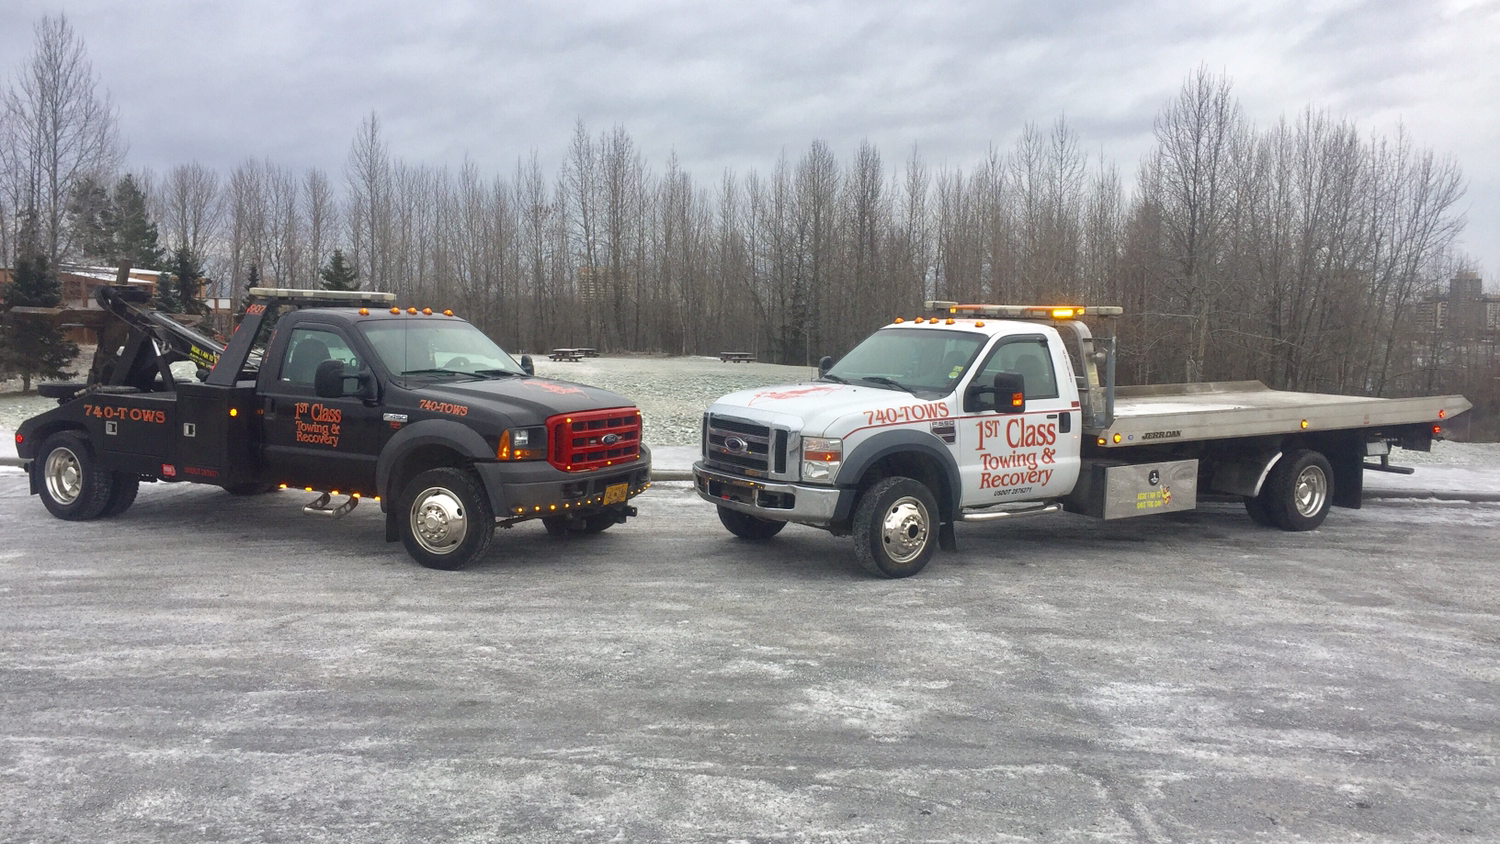 1st Class Towing & Recovery - Anchorage, JBER, Wasilla, Eagle River, Girdwood, Seward, Homer.